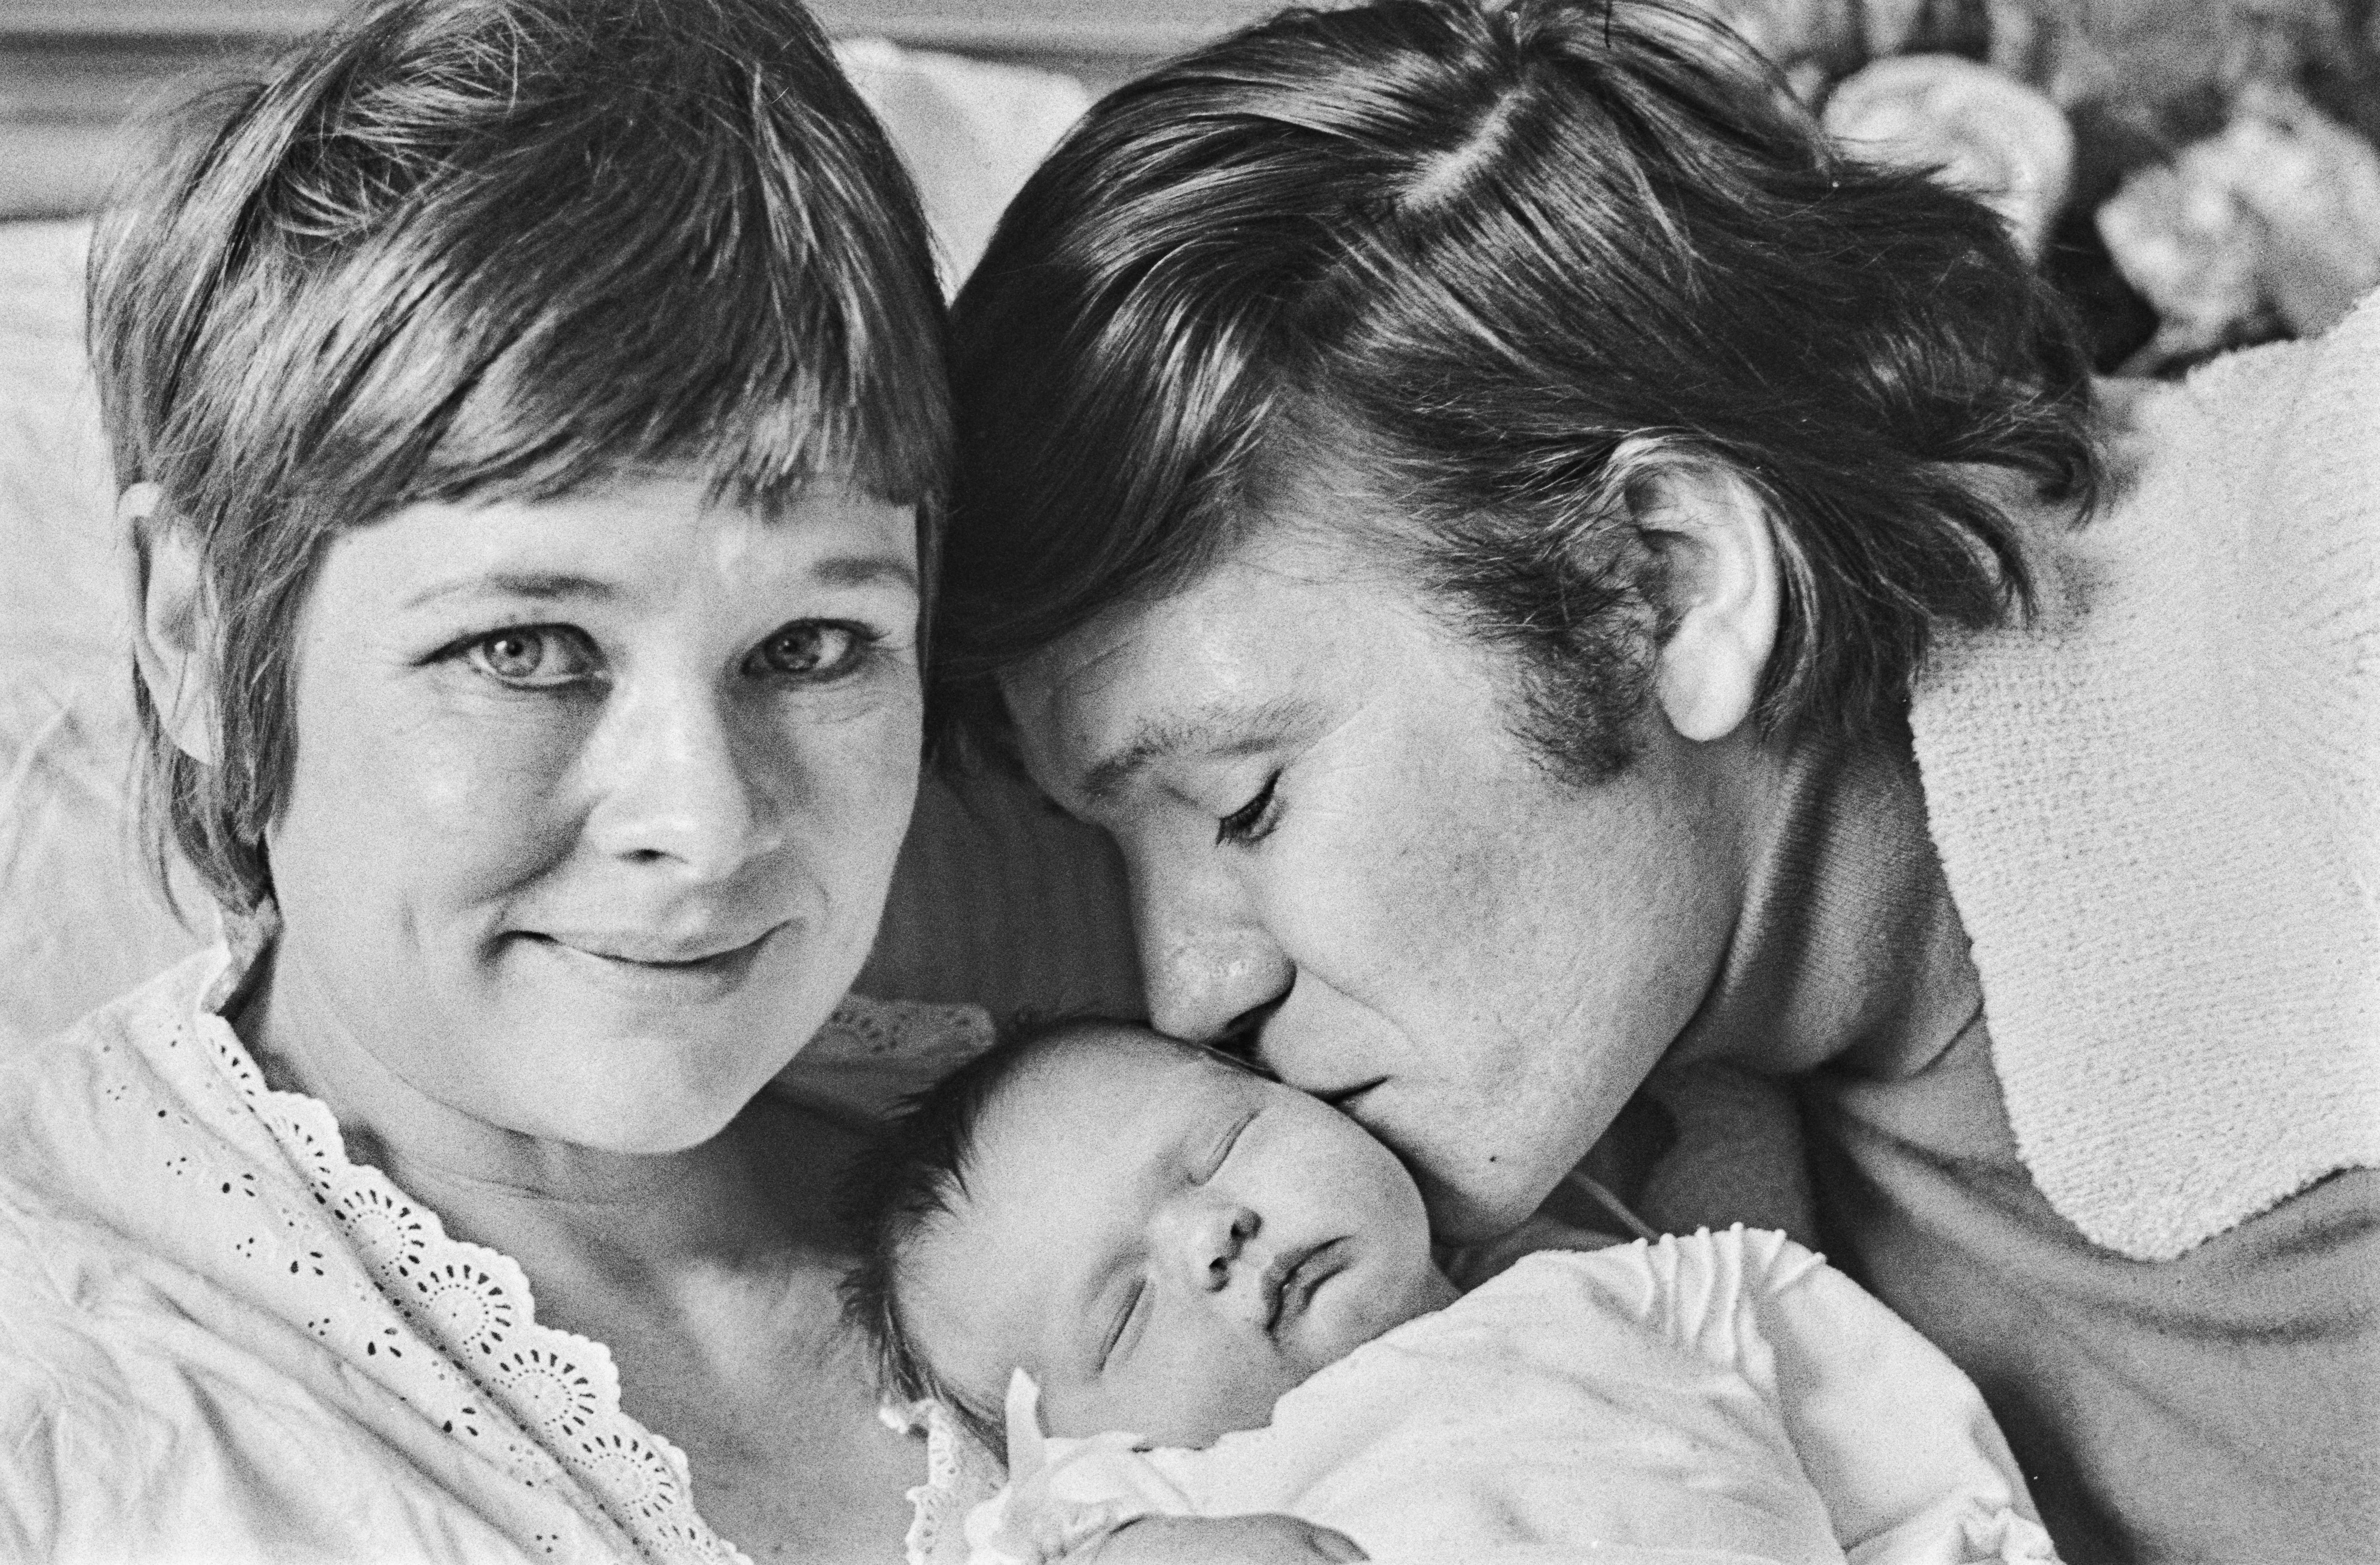 Judi Dench and Michael Williams photographed with their daughter Finty Williams on September 27, 1972 in the United Kingdom ┃Source: Getty Images